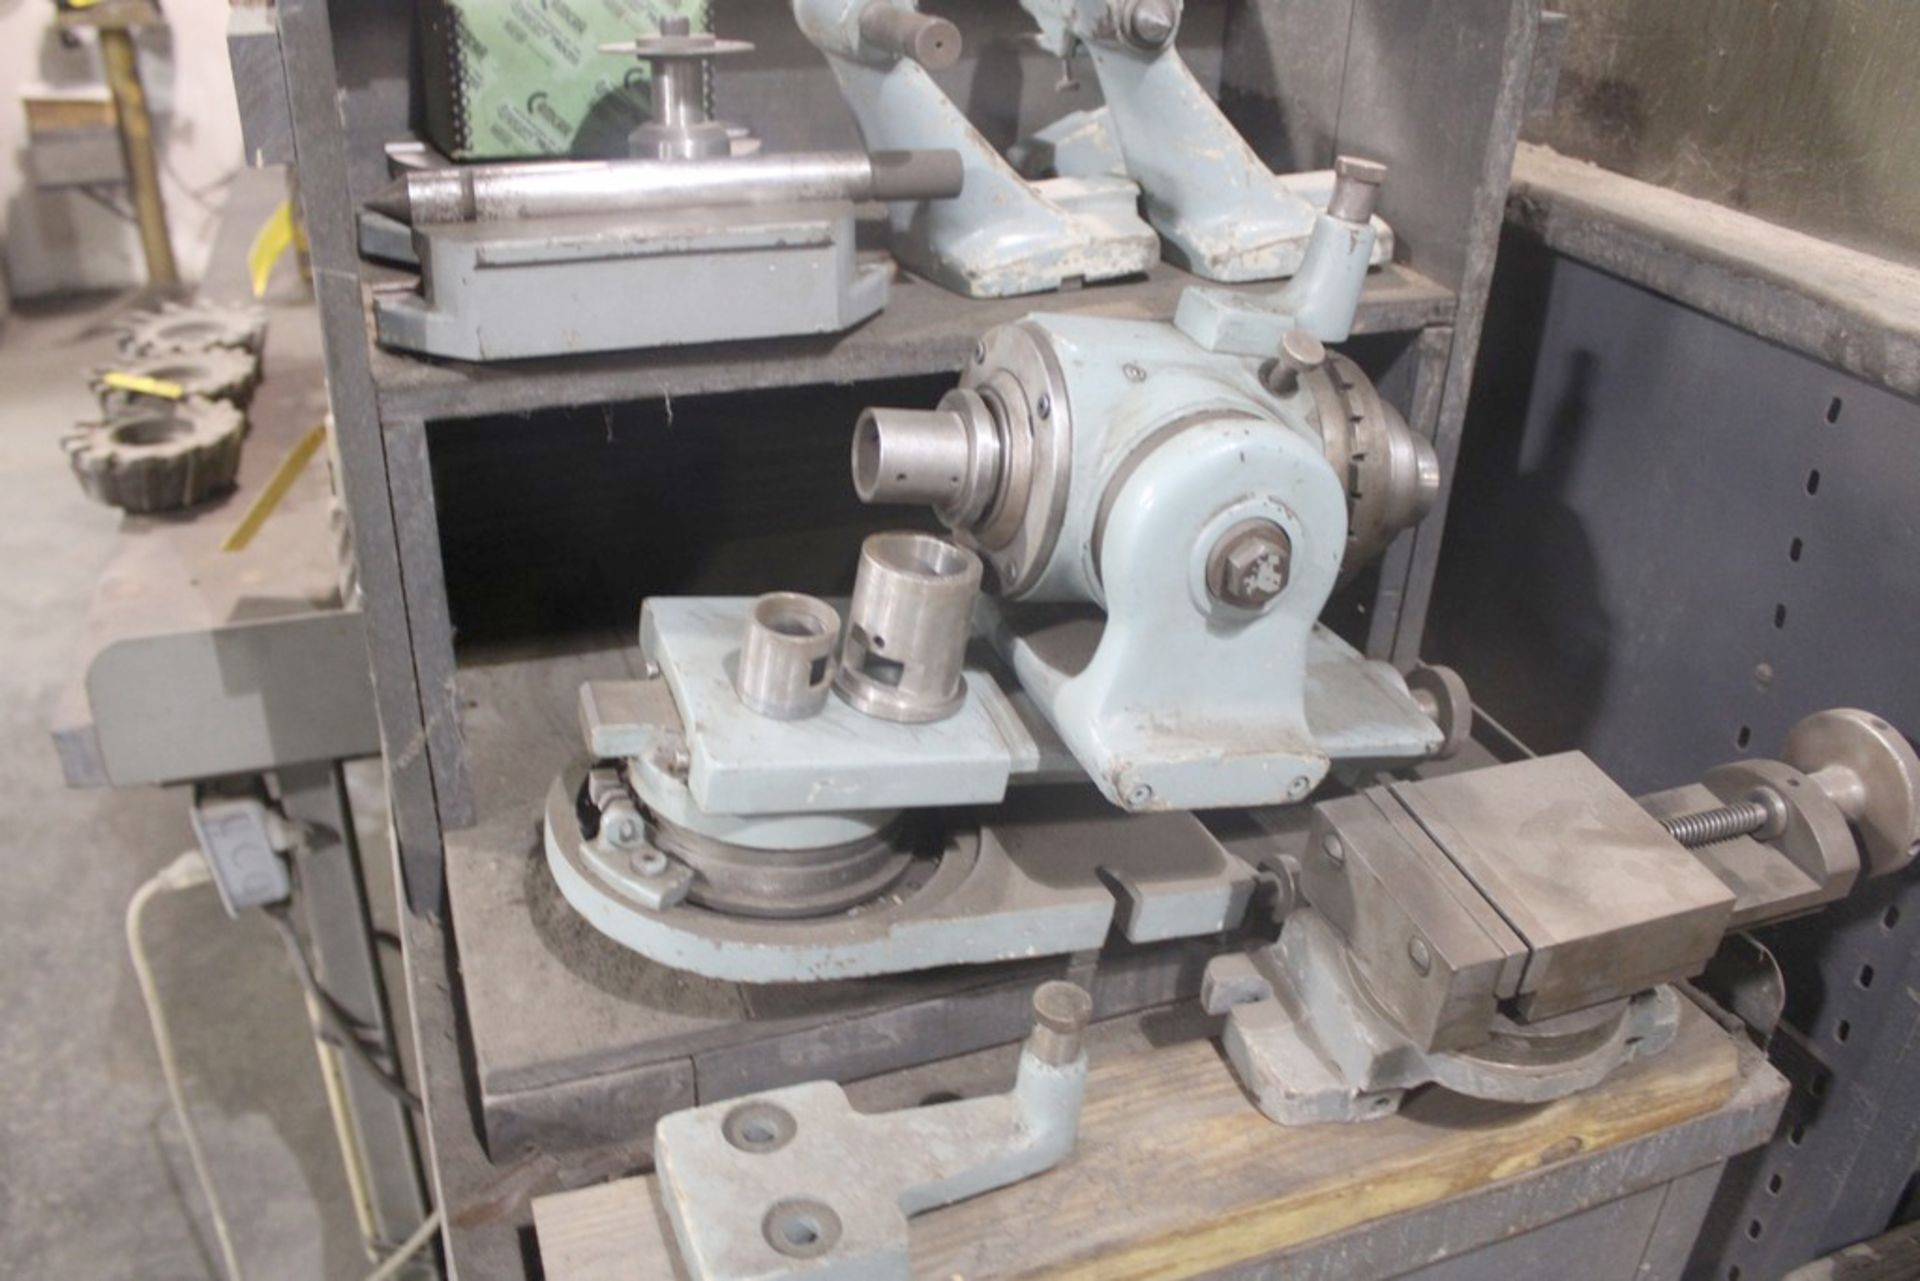 CINCINNATI NO. 2 TOOL & CUTTER GRINDER, S/N 1D2T6R-233, WITH WORK HEAD, LARGE QTY OF ACCESSORIES - Image 5 of 7